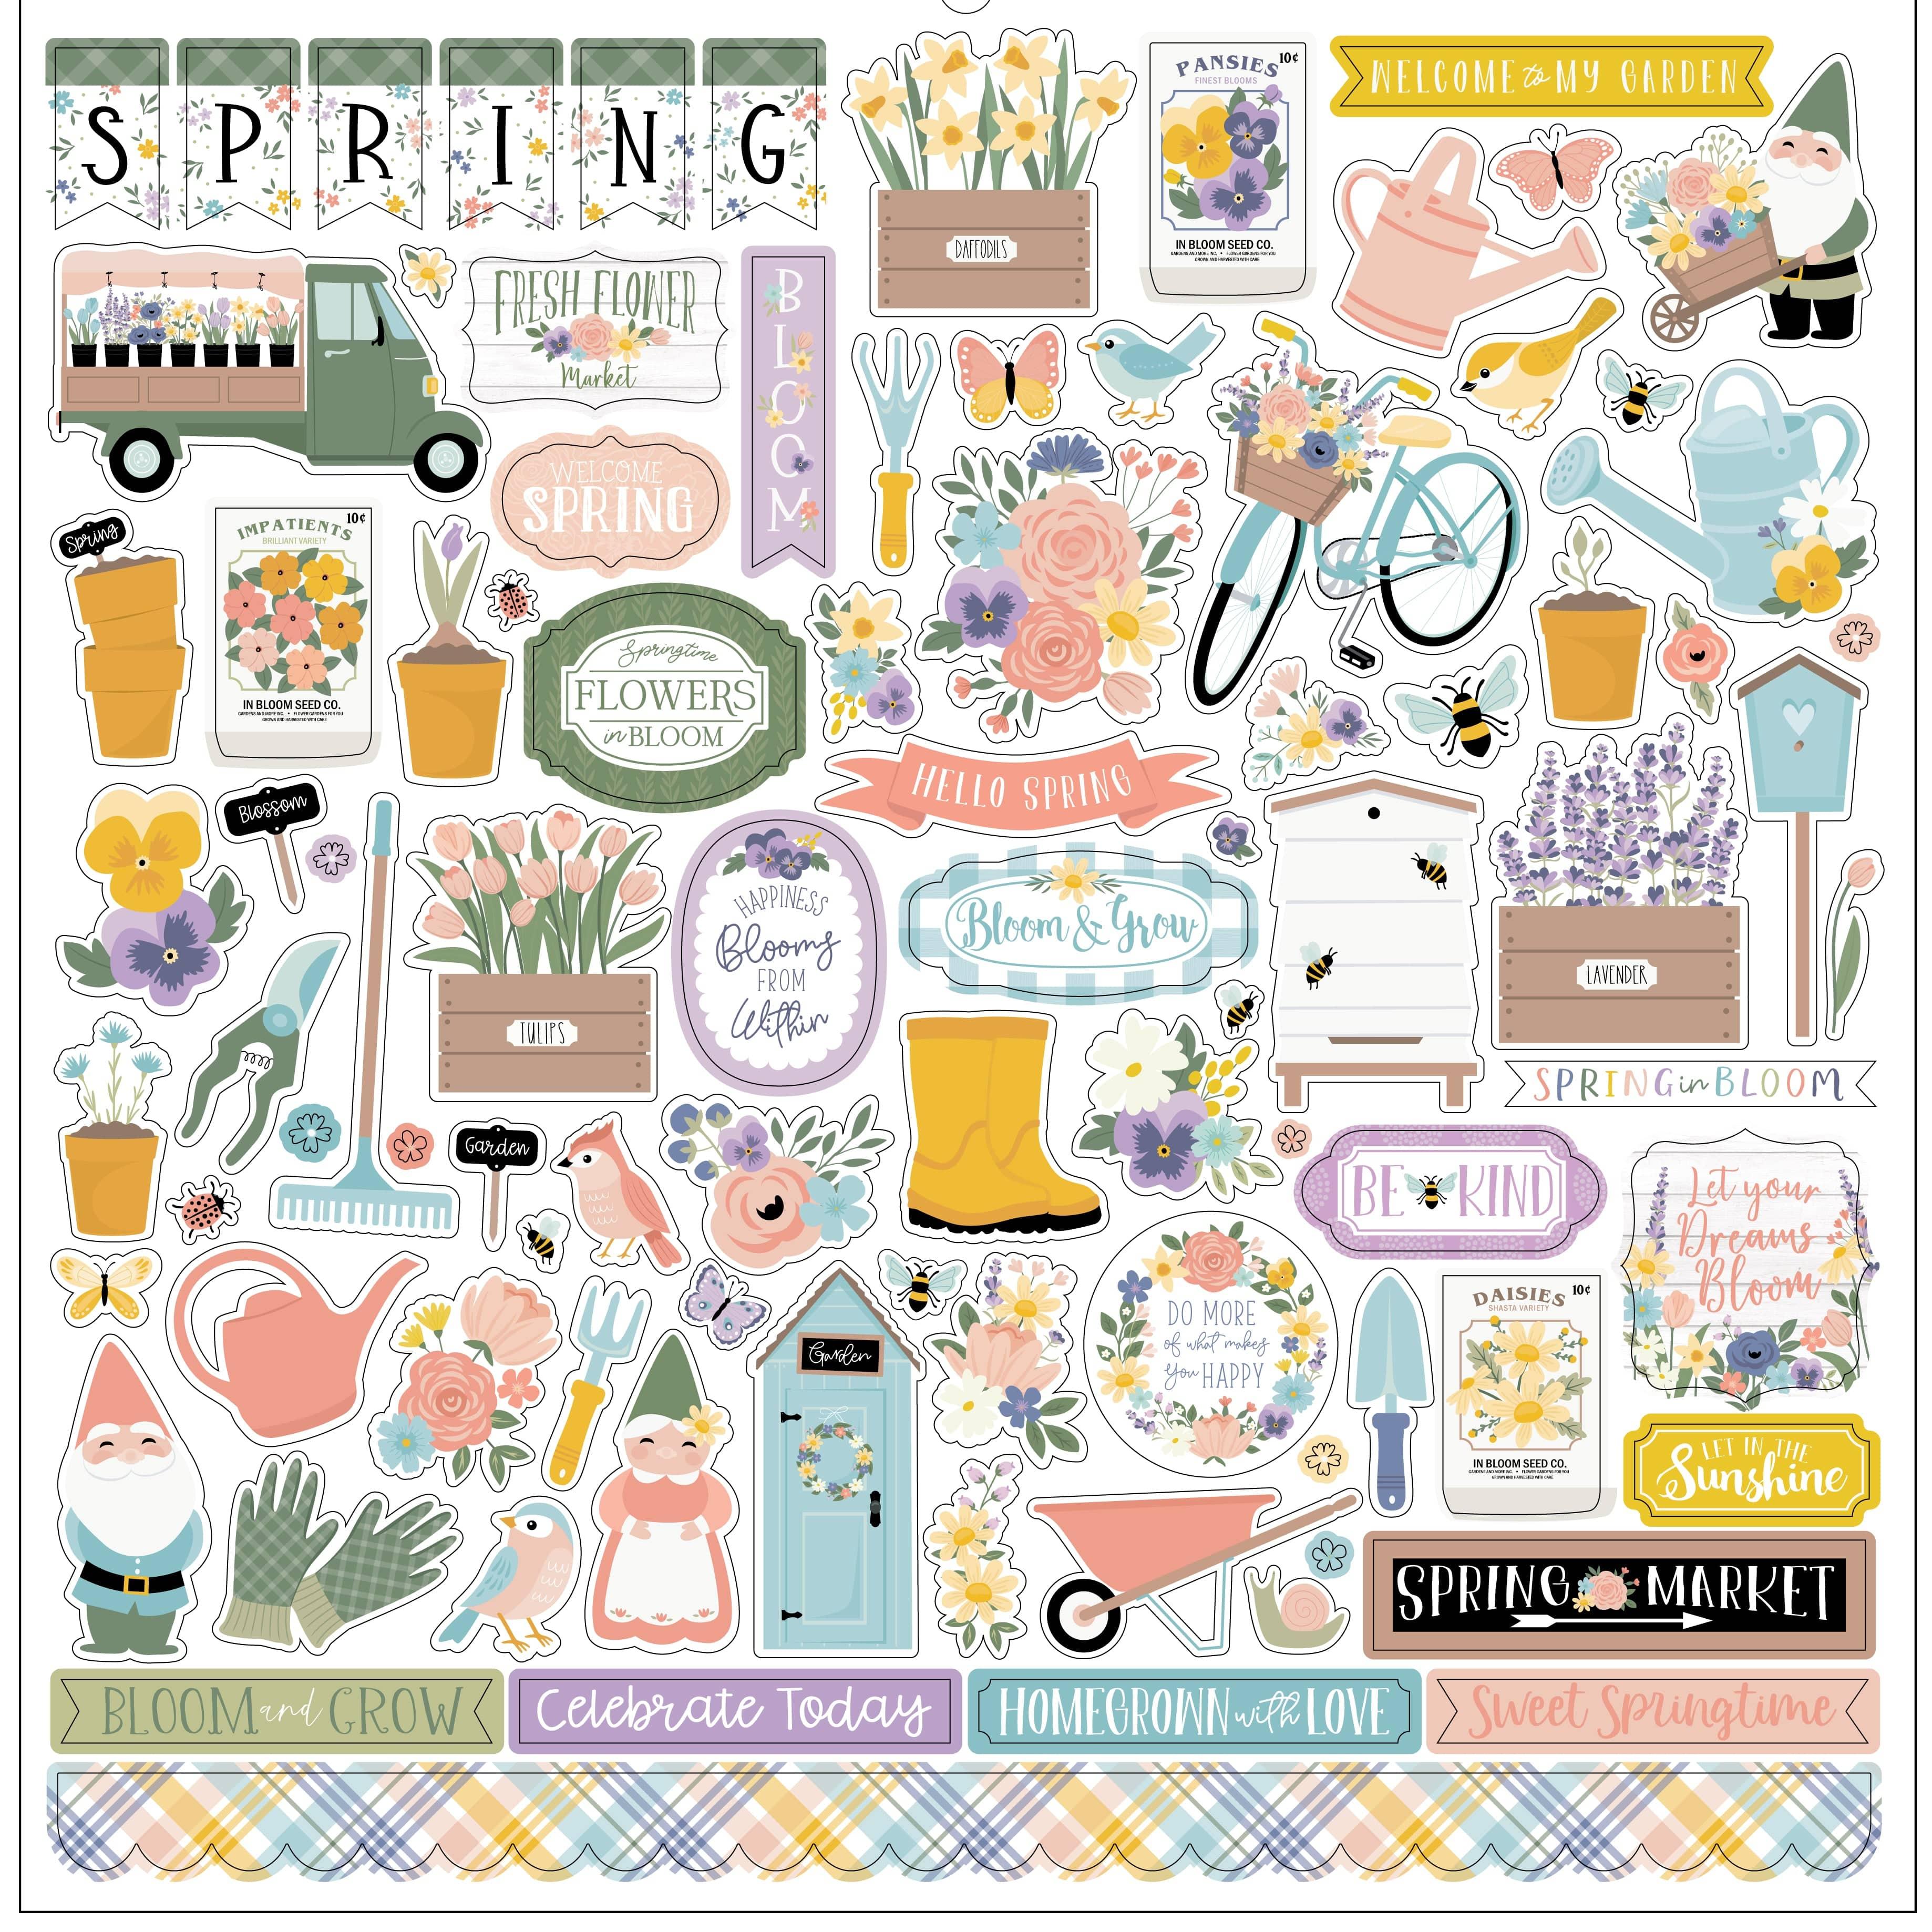 It's Spring Time Collection 12 x 12 Scrapbook Paper & Sticker Pack by Echo Park Paper - Scrapbook Supply Companies